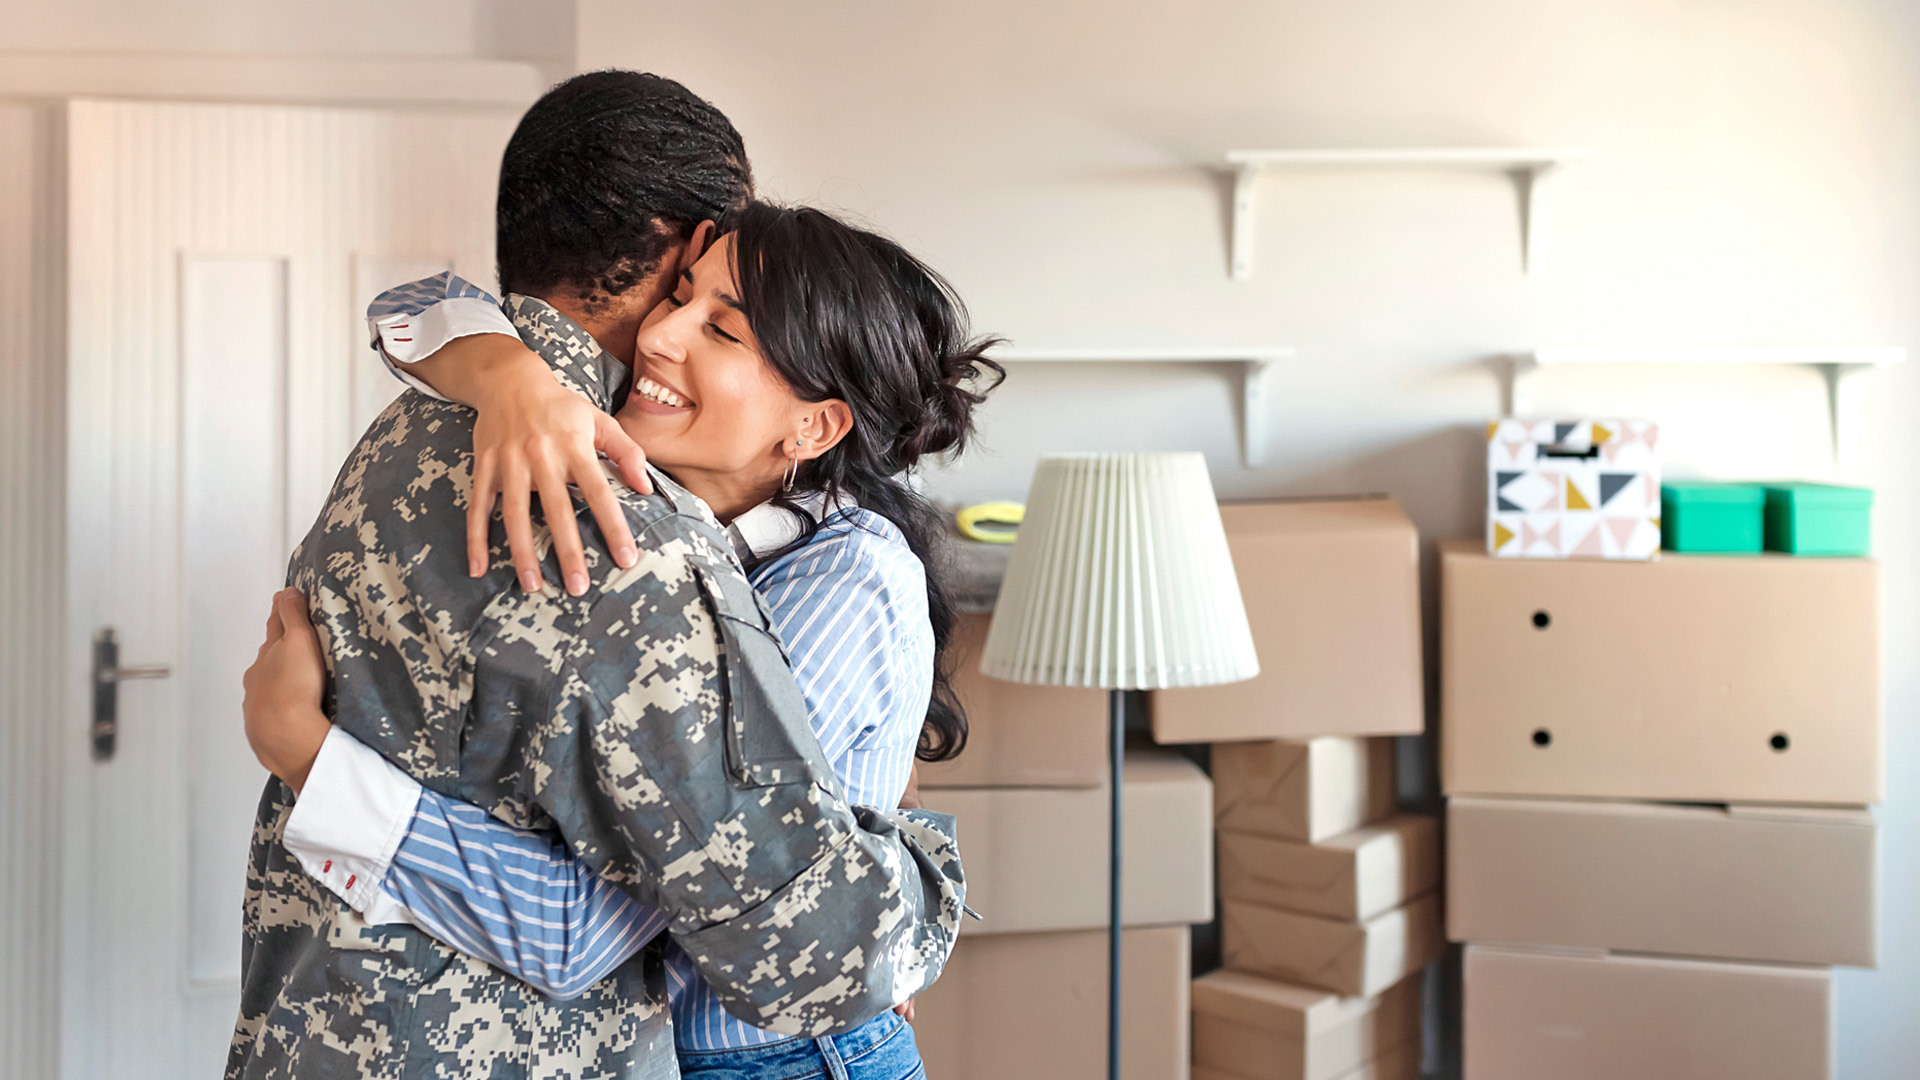 A veteran embraces his wife after moving into their new home.